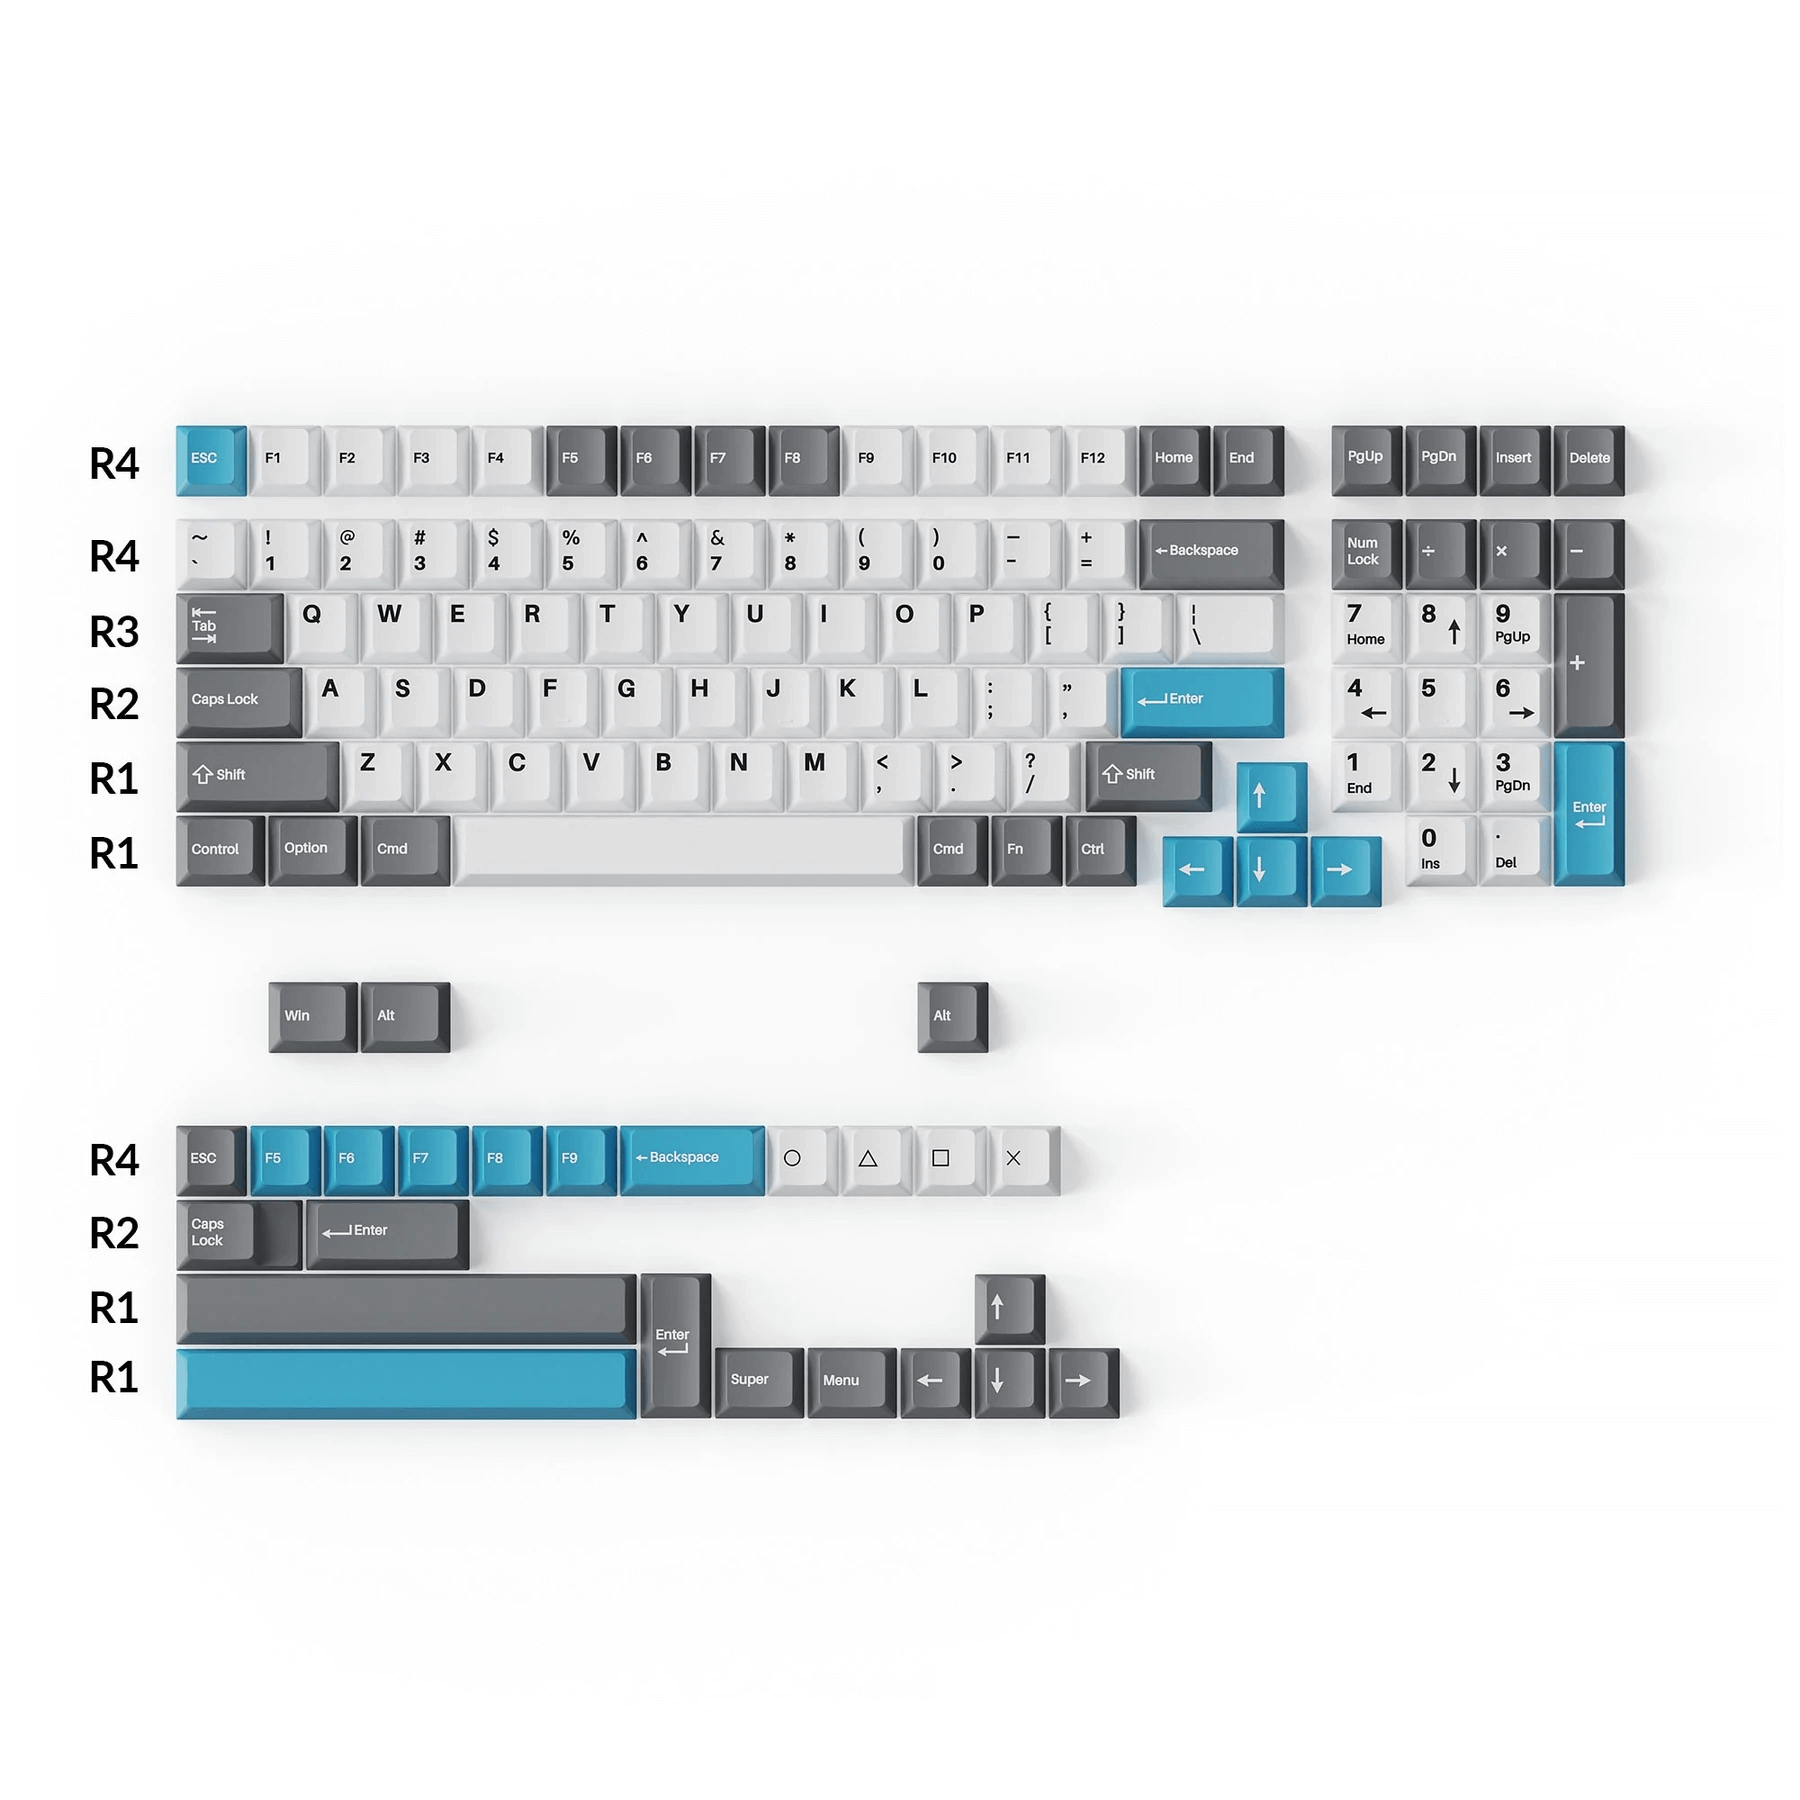 Cherry Profile Double-Shot PBT Full Set Keycaps - Grey, White and Blue